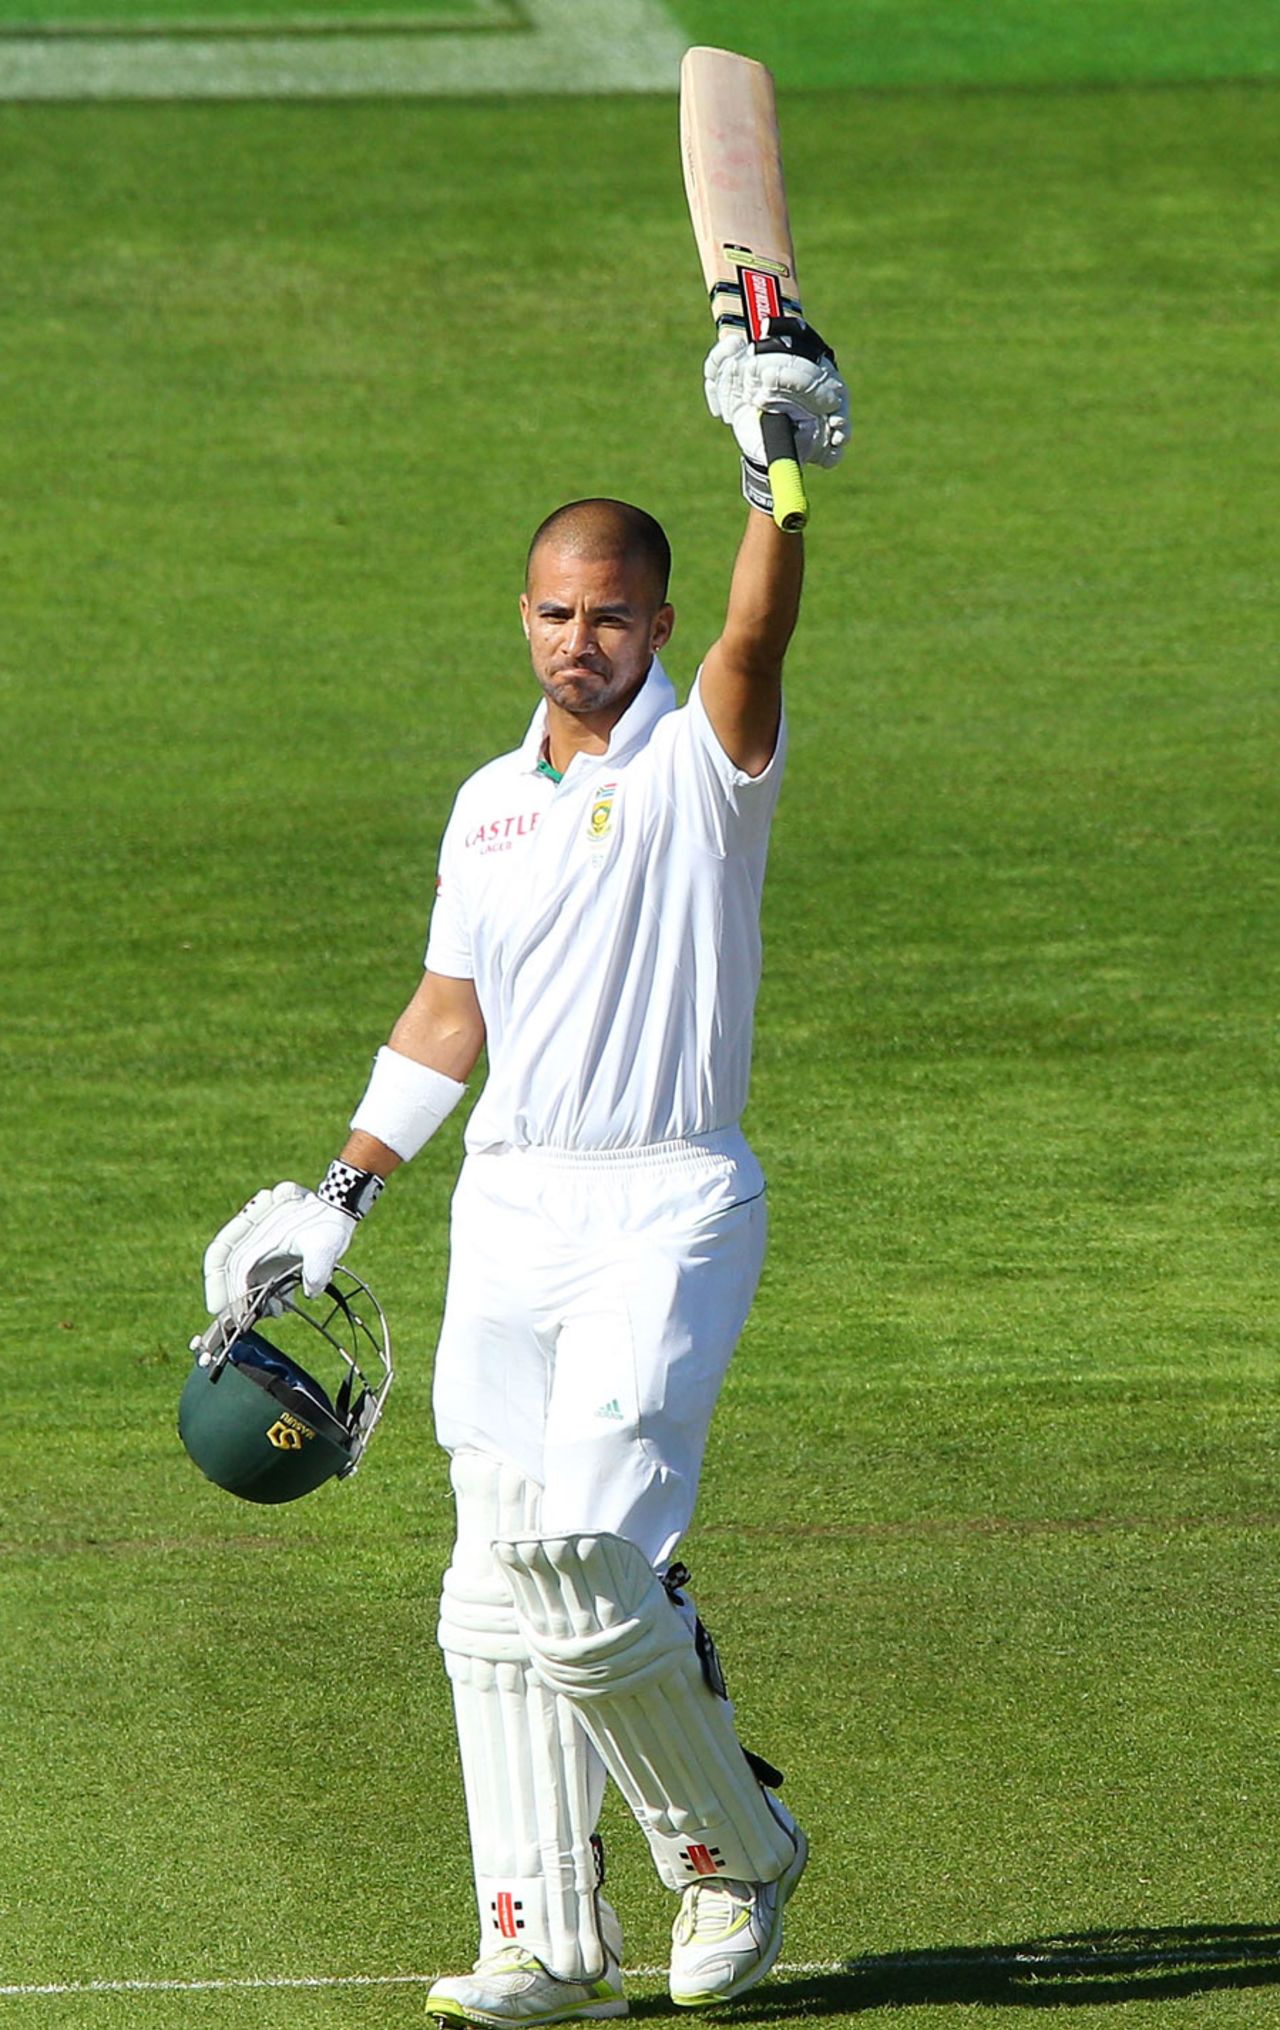 JP Duminy raises his bat after reaching his century, New Zealand v South Africa, 3rd Test, Wellington, 3rd day, March 25, 2012